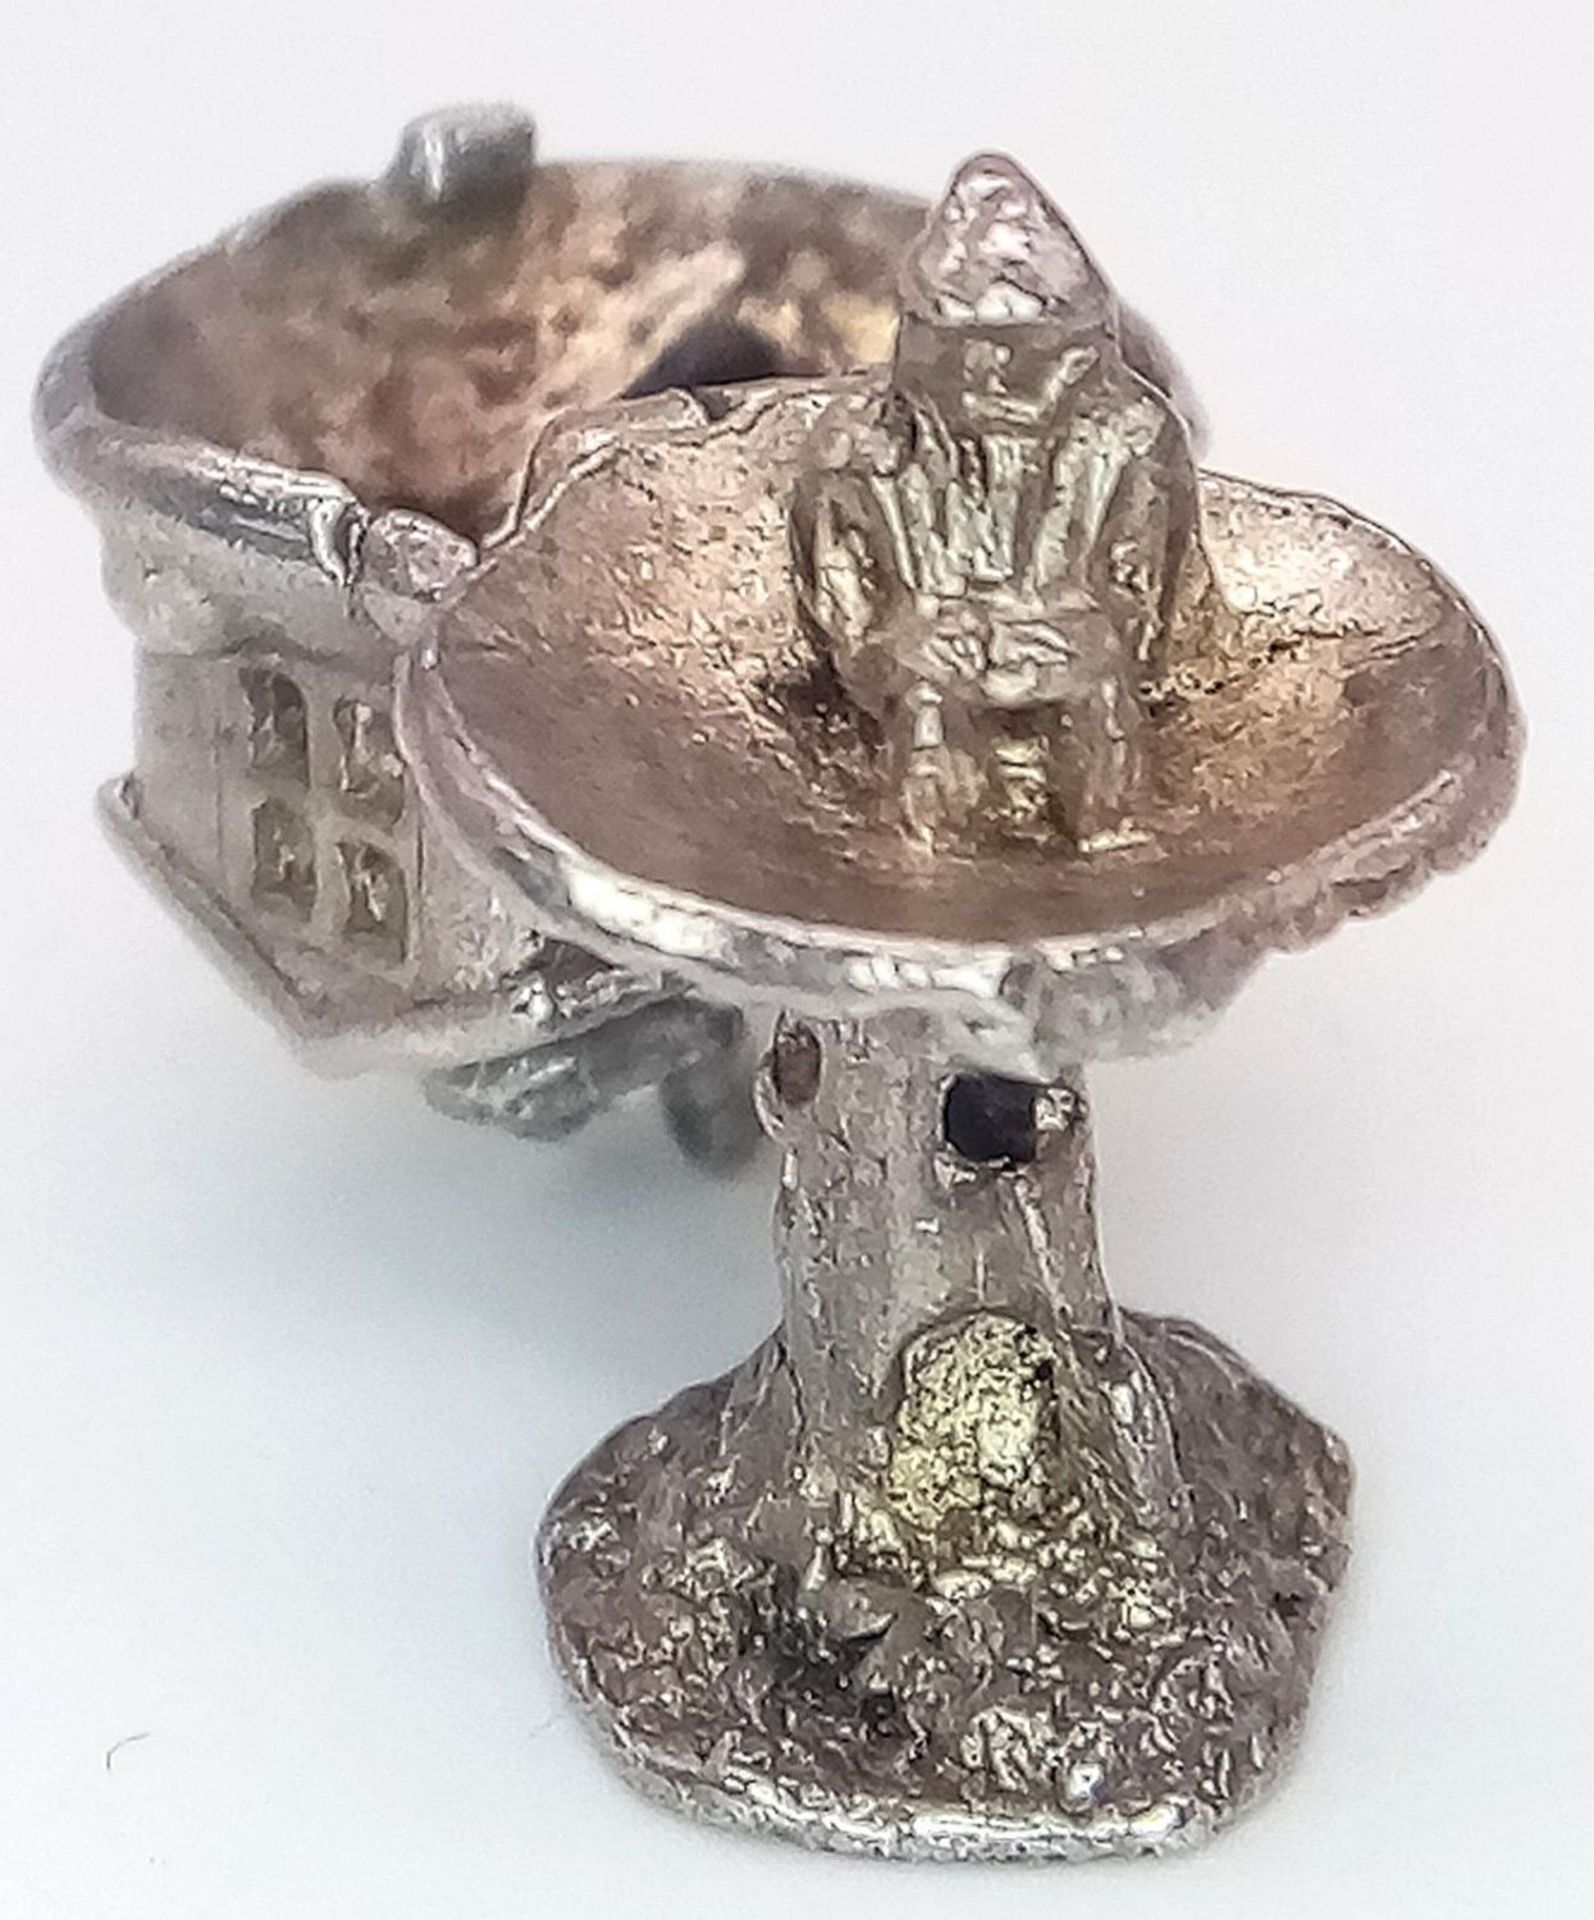 A VINTAGE STERLING SILVER TREE HOUSE CHARM, WHICH OPENS TO REVEAL A WIZARD INSIDE, WEIGHT 4G - Image 5 of 8